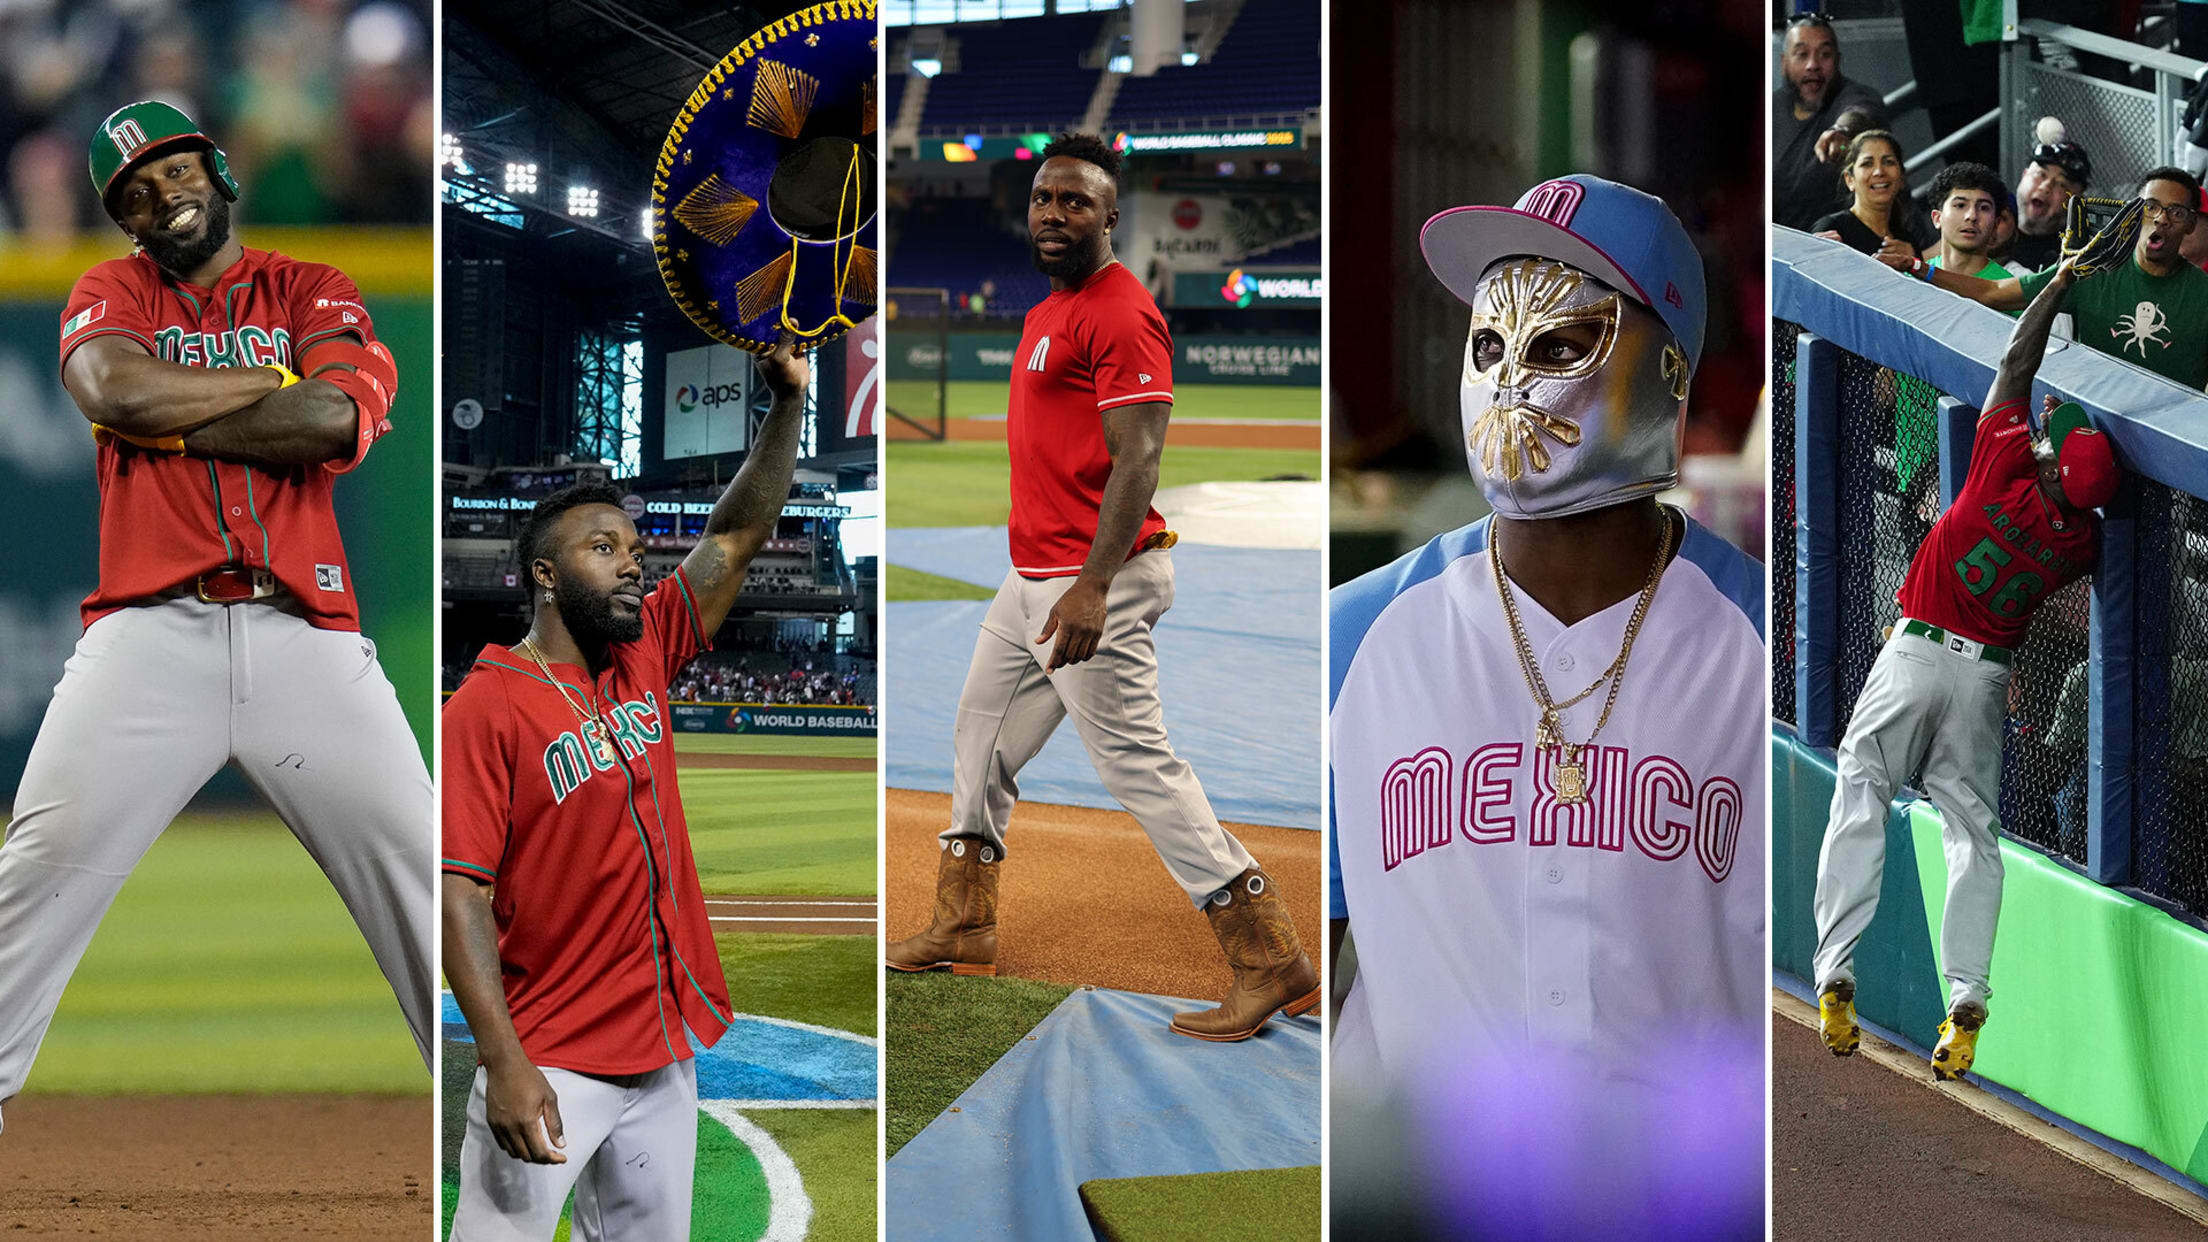 Five images of Randy Arozarena posing, holding a sombrero, modeling cowboy boots, in a Mexican wrestling mask and robbing a home run